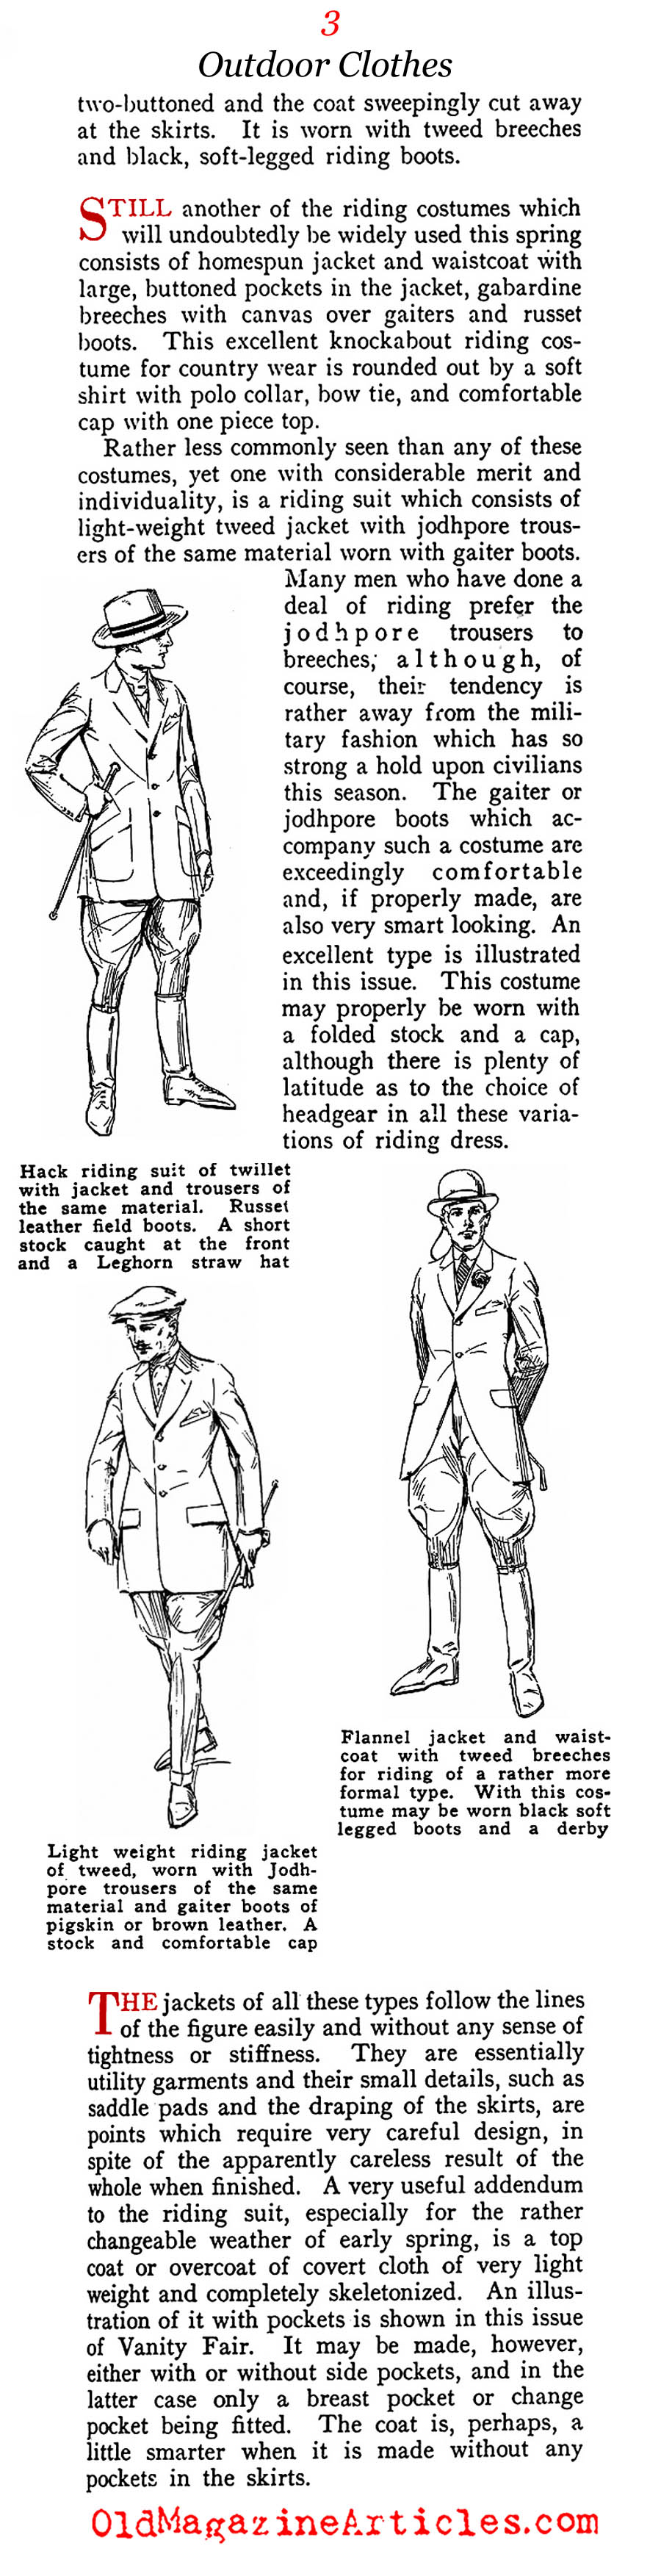 Man and Horse and Equestrian Clothing (Vanity Fair Magazine, 1918)